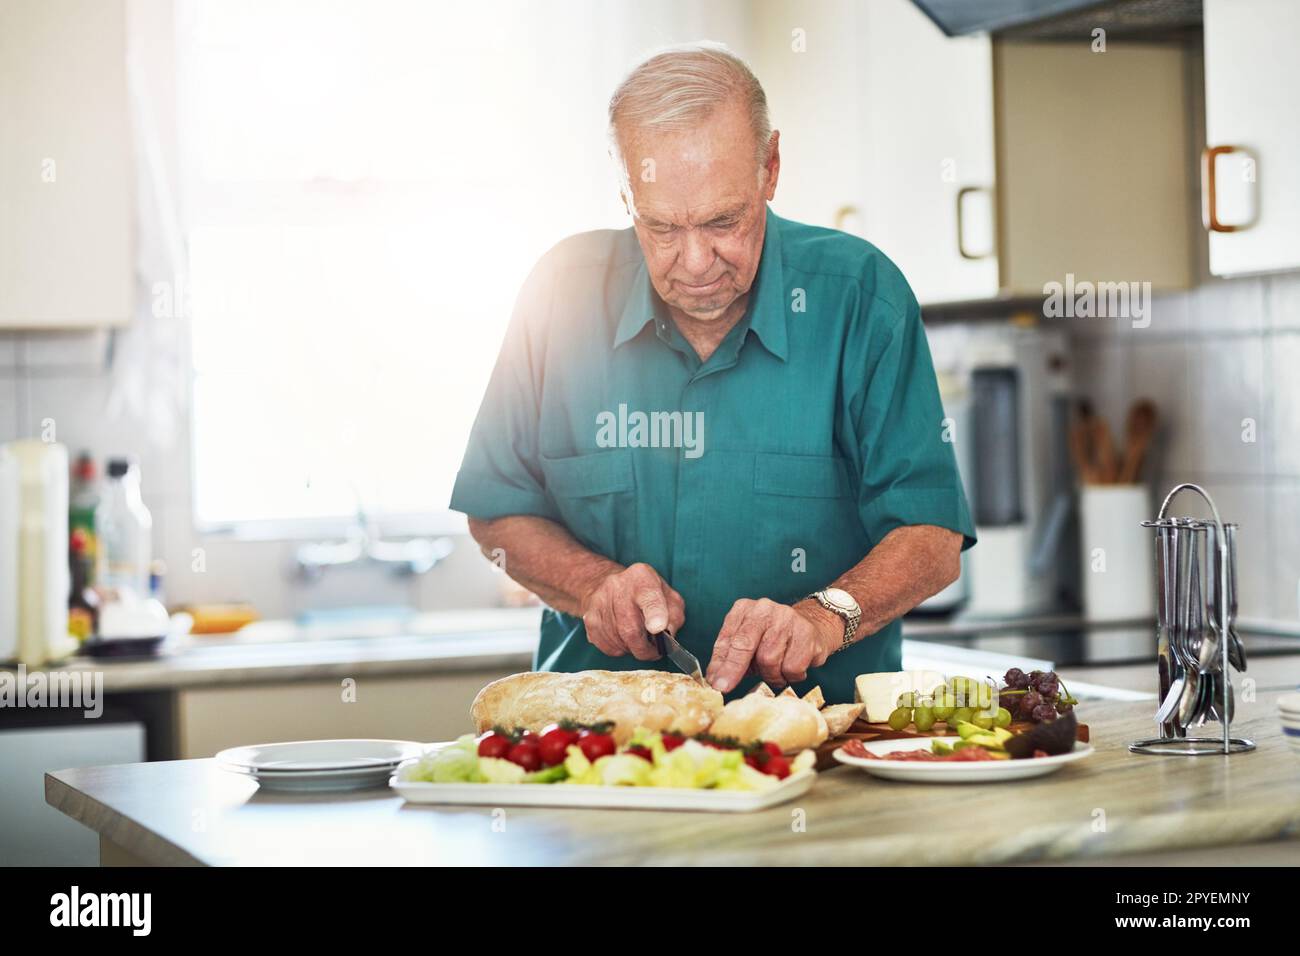 Retirement living at its finest. a senior man making lunch in his kitchen at home. Stock Photo